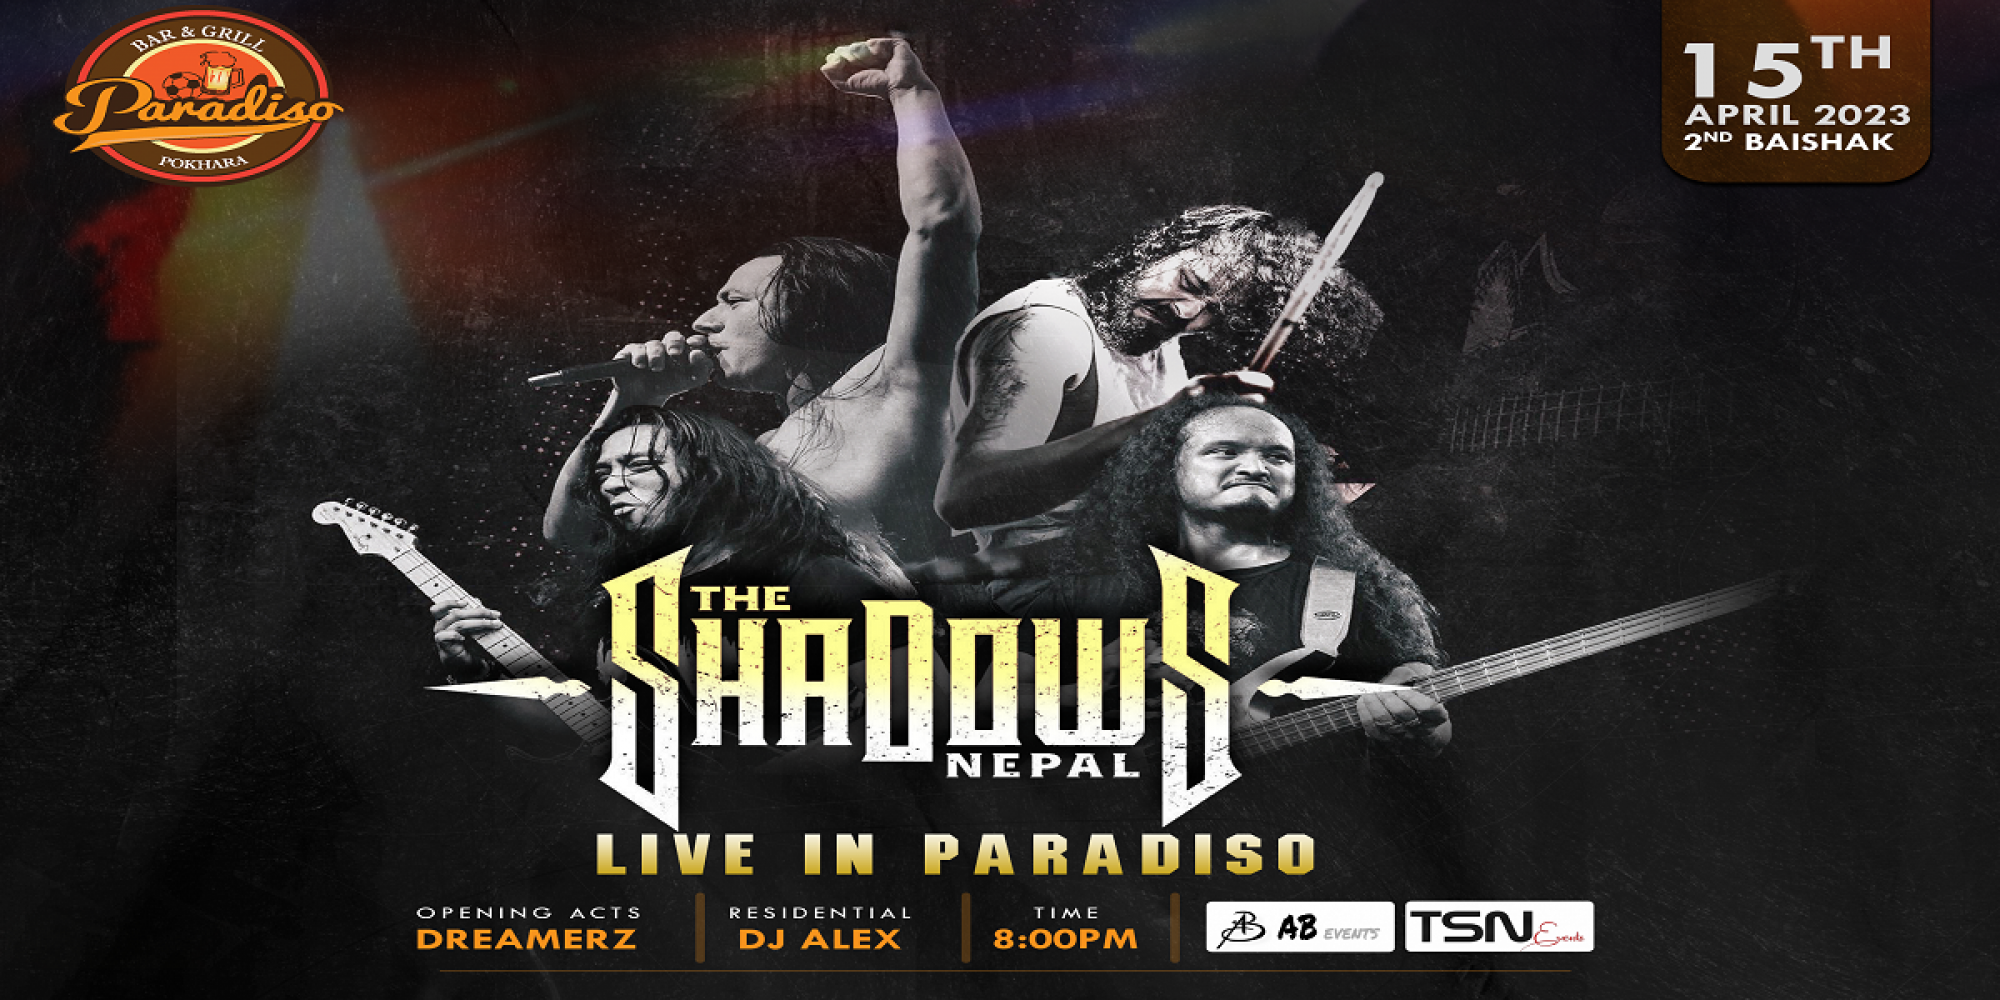 THE SHADOWS NEPAL – LIVE IN PARADISO